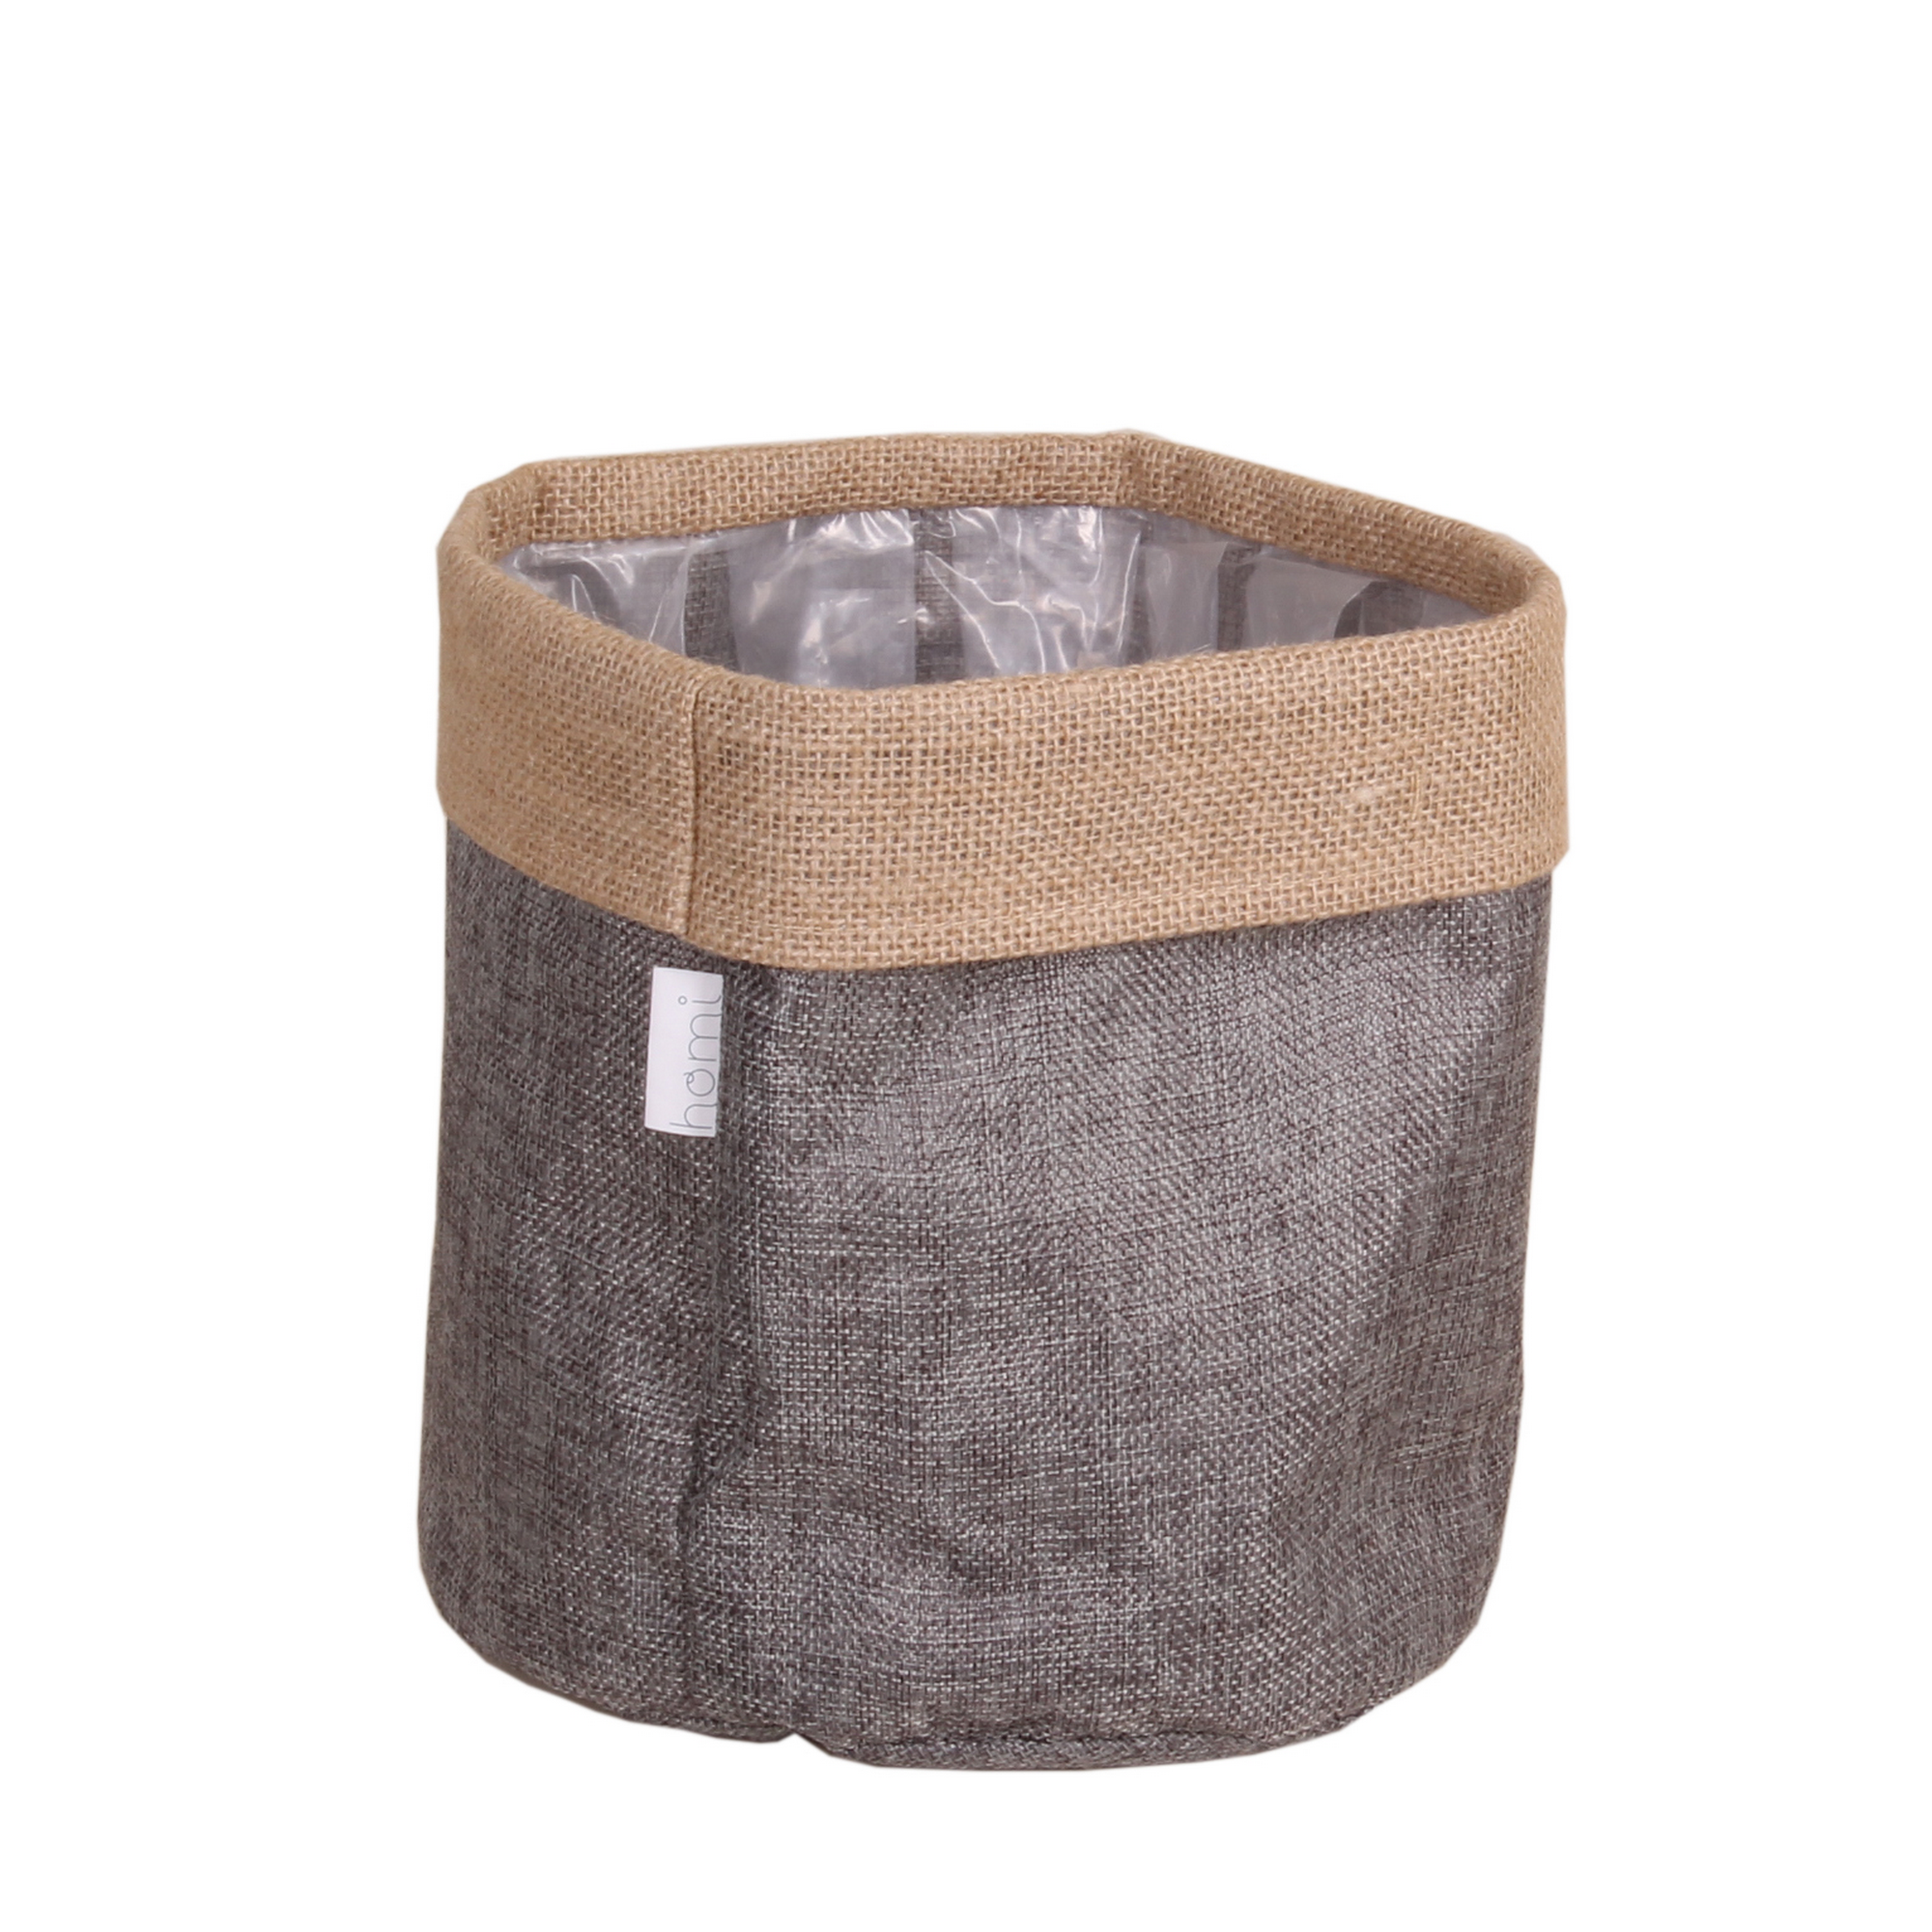 Pflanzkorb Jute/Polyester natur/grau Ø 13 x 13 cm + product picture